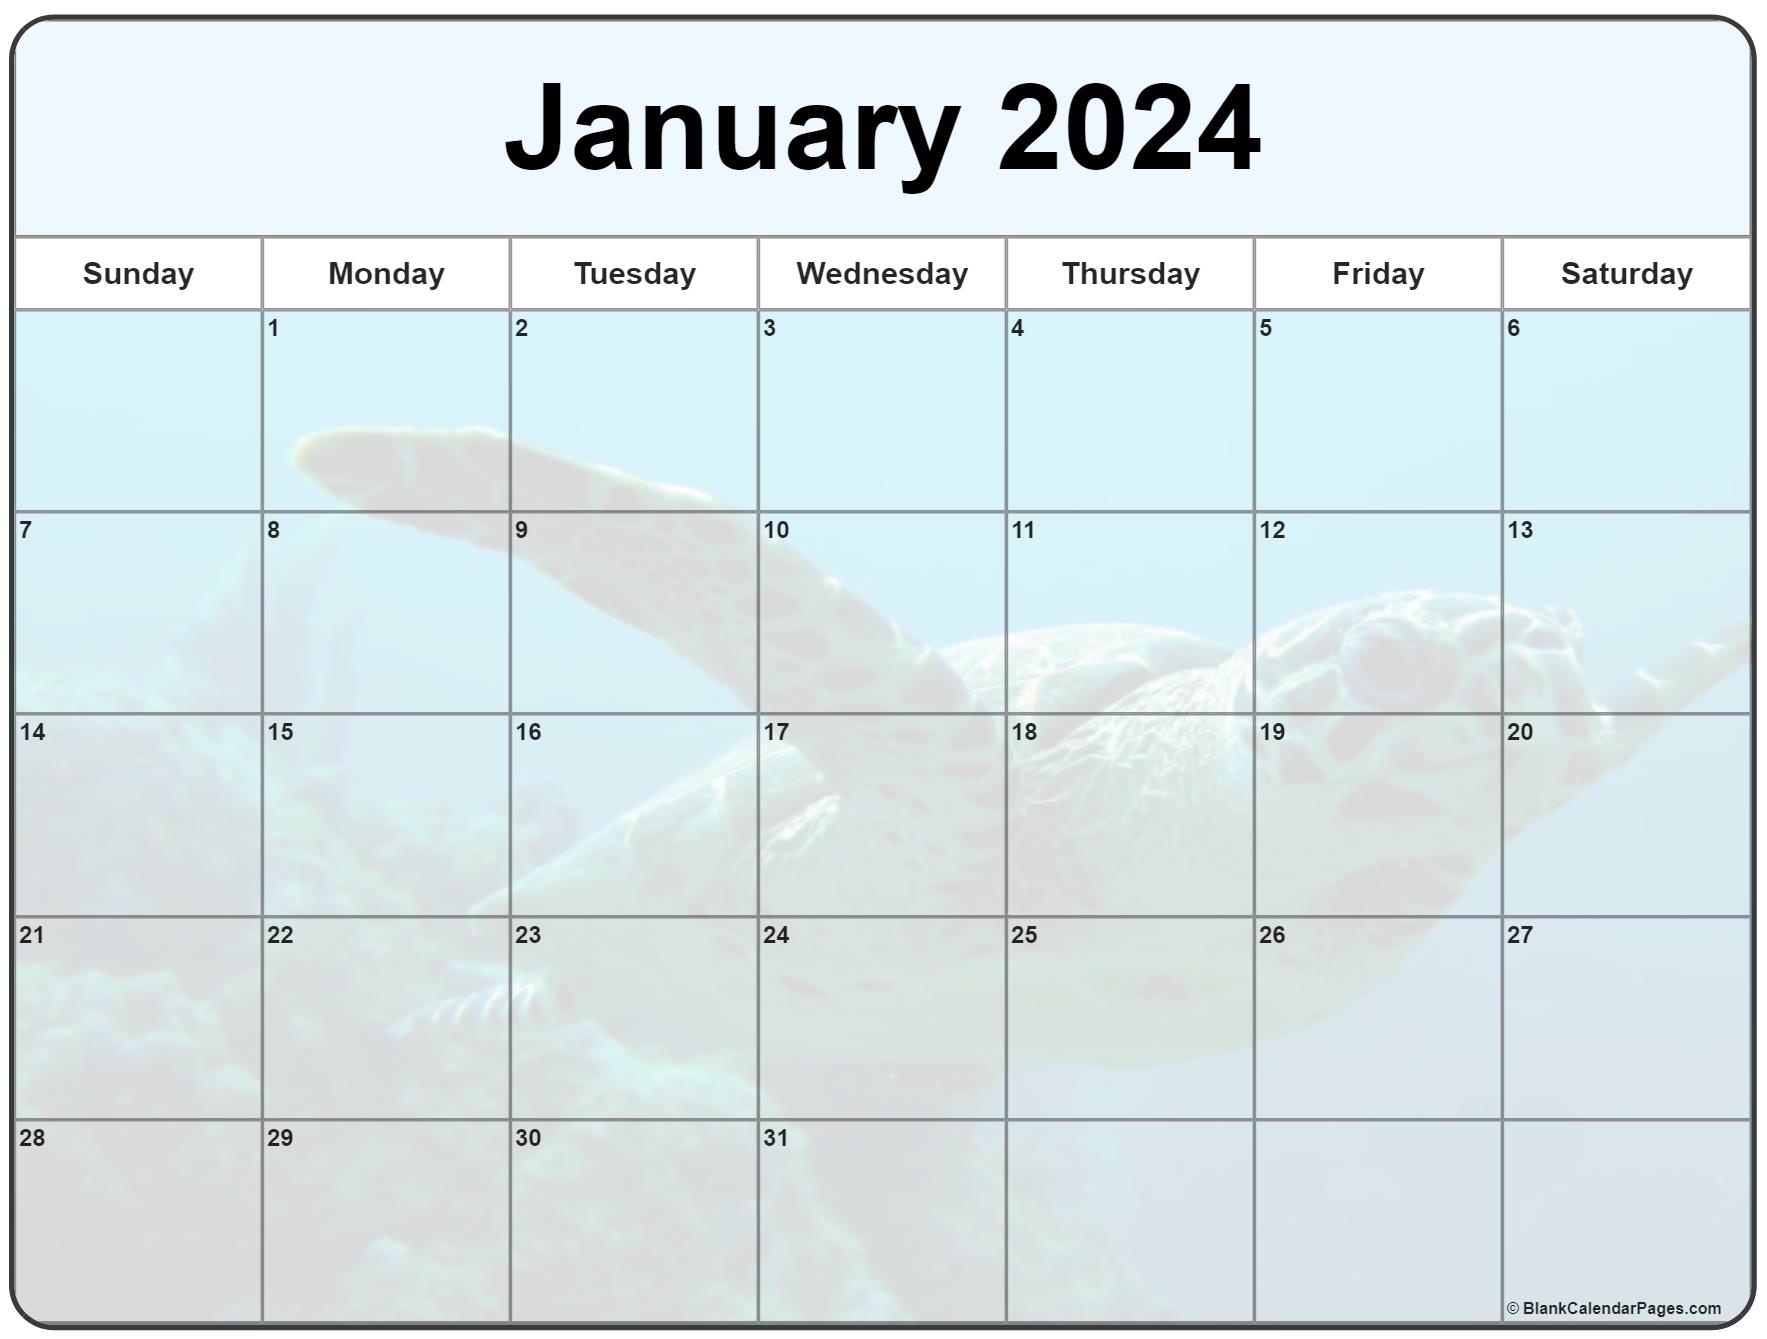 Collection Of January 2023 Photo Calendars With Image Filters.